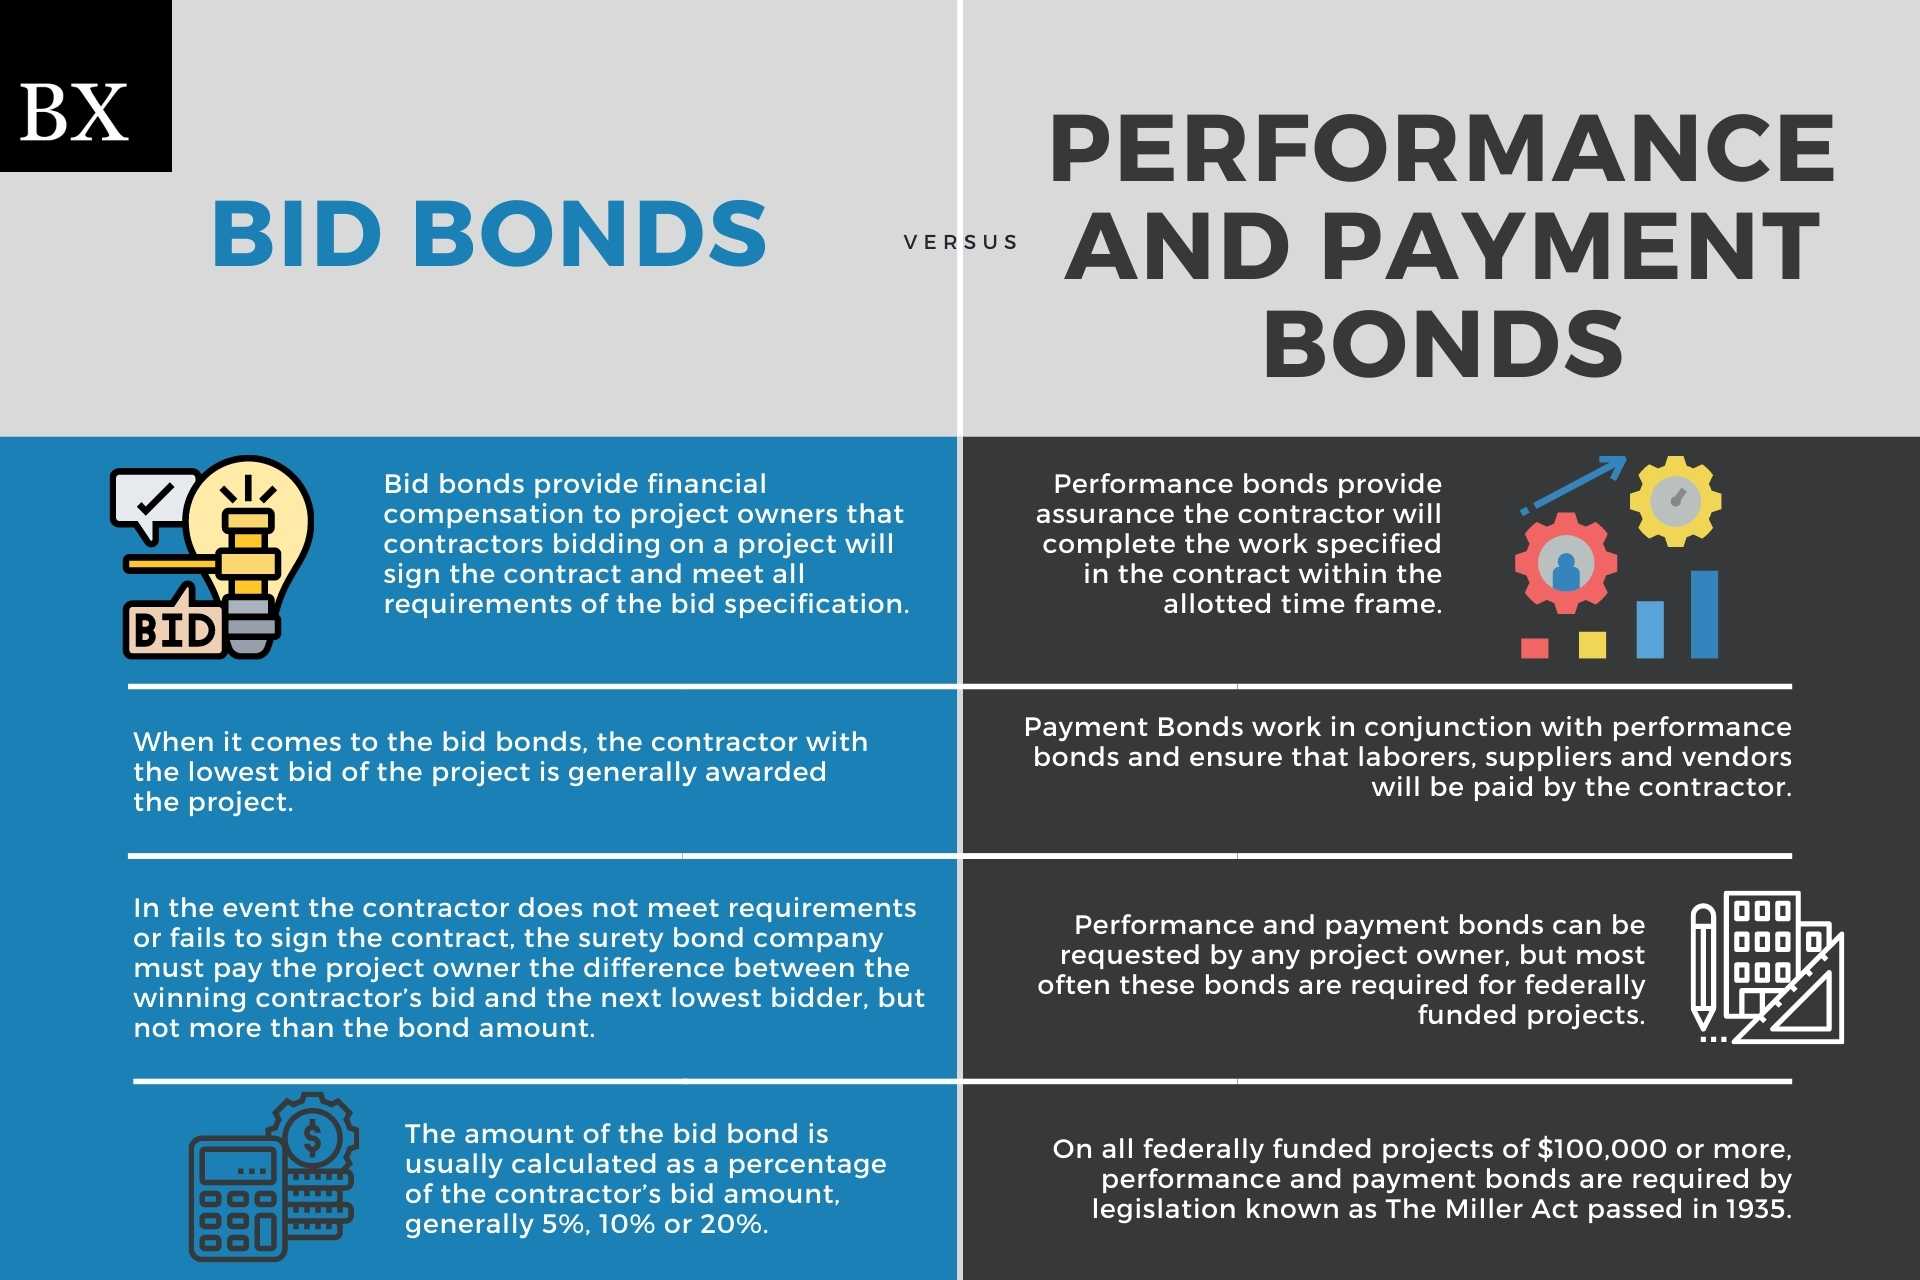 Bonds and Performance and Payment Bonds